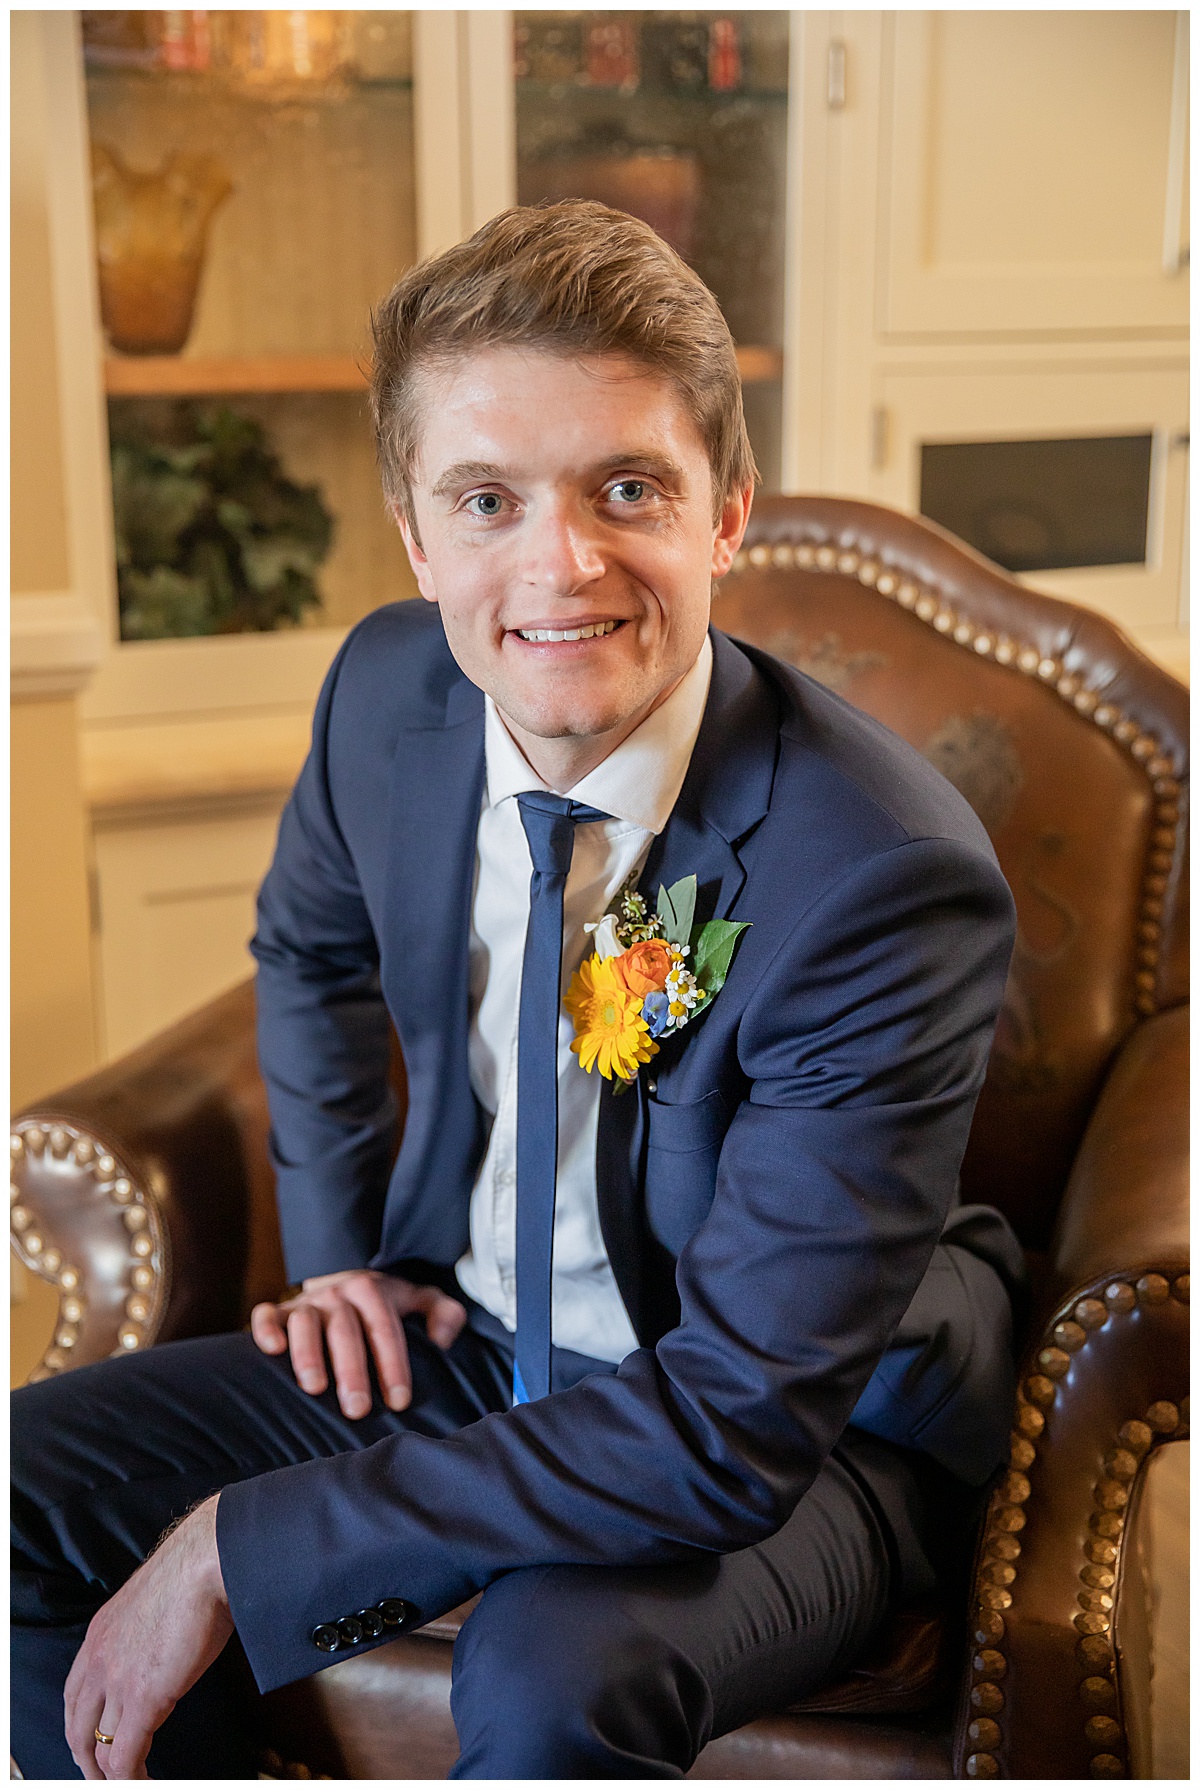 The groom poses in the groom's quarters in his blue suit on a leather chair. 